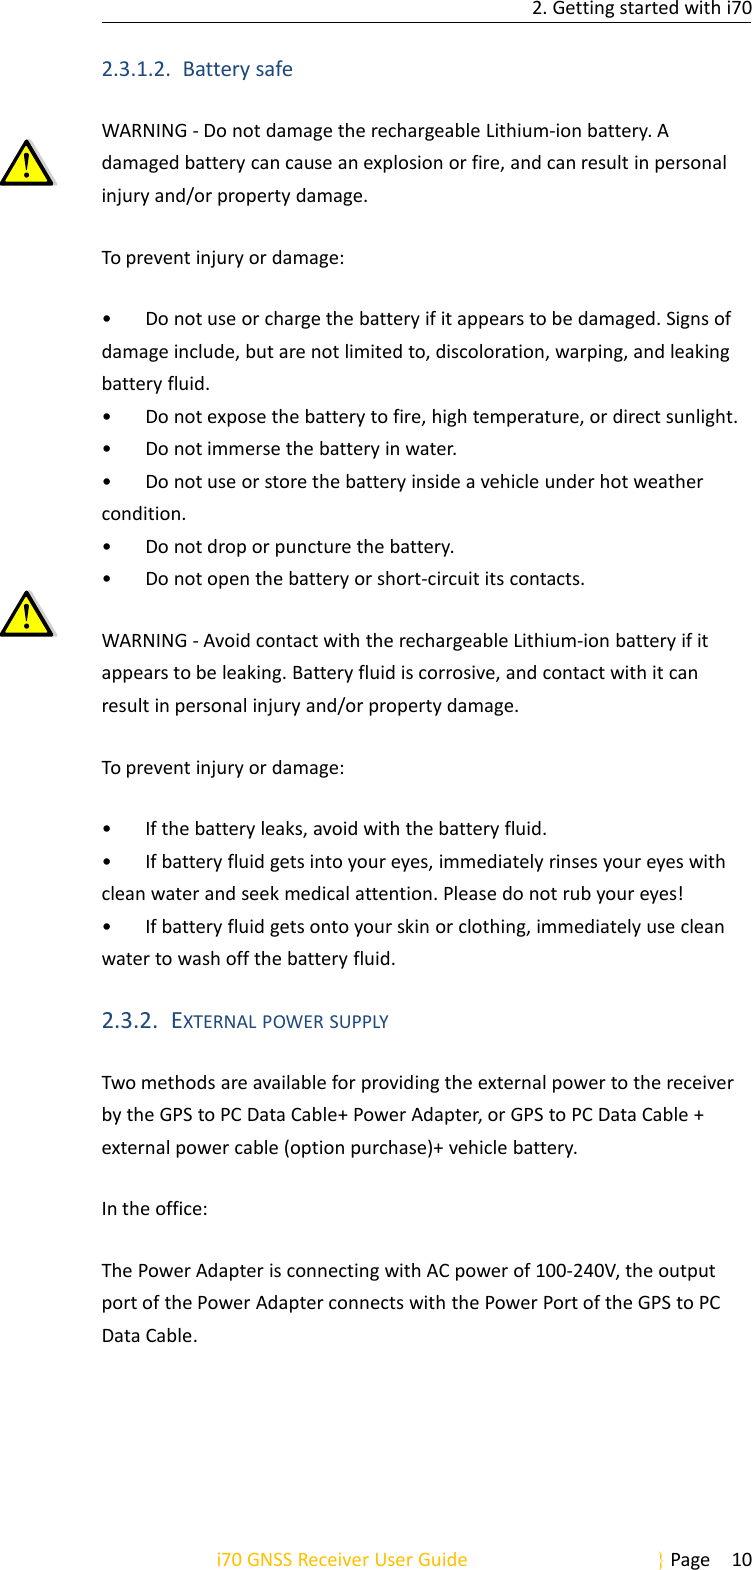 2. Getting started with i70i70 GNSS Receiver User Guide Page 102.3.1.2. Battery safeWARNING - Do not damage the rechargeable Lithium-ion battery. Adamaged battery can cause an explosion or fire, and can result in personalinjury and/or property damage.To prevent injury or damage:• Do not use or charge the battery if it appears to be damaged. Signs ofdamage include, but are not limited to, discoloration, warping, and leakingbattery fluid.• Do not expose the battery to fire, high temperature, or direct sunlight.• Do not immerse the battery in water.• Do not use or store the battery inside a vehicle under hot weathercondition.• Do not drop or puncture the battery.• Do not open the battery or short-circuit its contacts.WARNING - Avoid contact with the rechargeable Lithium-ion battery if itappears to be leaking. Battery fluid is corrosive, and contact with it canresult in personal injury and/or property damage.To prevent injury or damage:• If the battery leaks, avoid with the battery fluid.• If battery fluid gets into your eyes, immediately rinses your eyes withclean water and seek medical attention. Please do not rub your eyes!• If battery fluid gets onto your skin or clothing, immediately use cleanwater to wash off the battery fluid.2.3.2. EXTERNAL POWER SUPPLYTwo methods are available for providing the external power to the receiverby the GPS to PC Data Cable+ Power Adapter, or GPS to PC Data Cable +external power cable (option purchase)+ vehicle battery.In the office:The Power Adapter is connecting with AC power of 100-240V, the outputport of the Power Adapter connects with the Power Port of the GPS to PCData Cable.